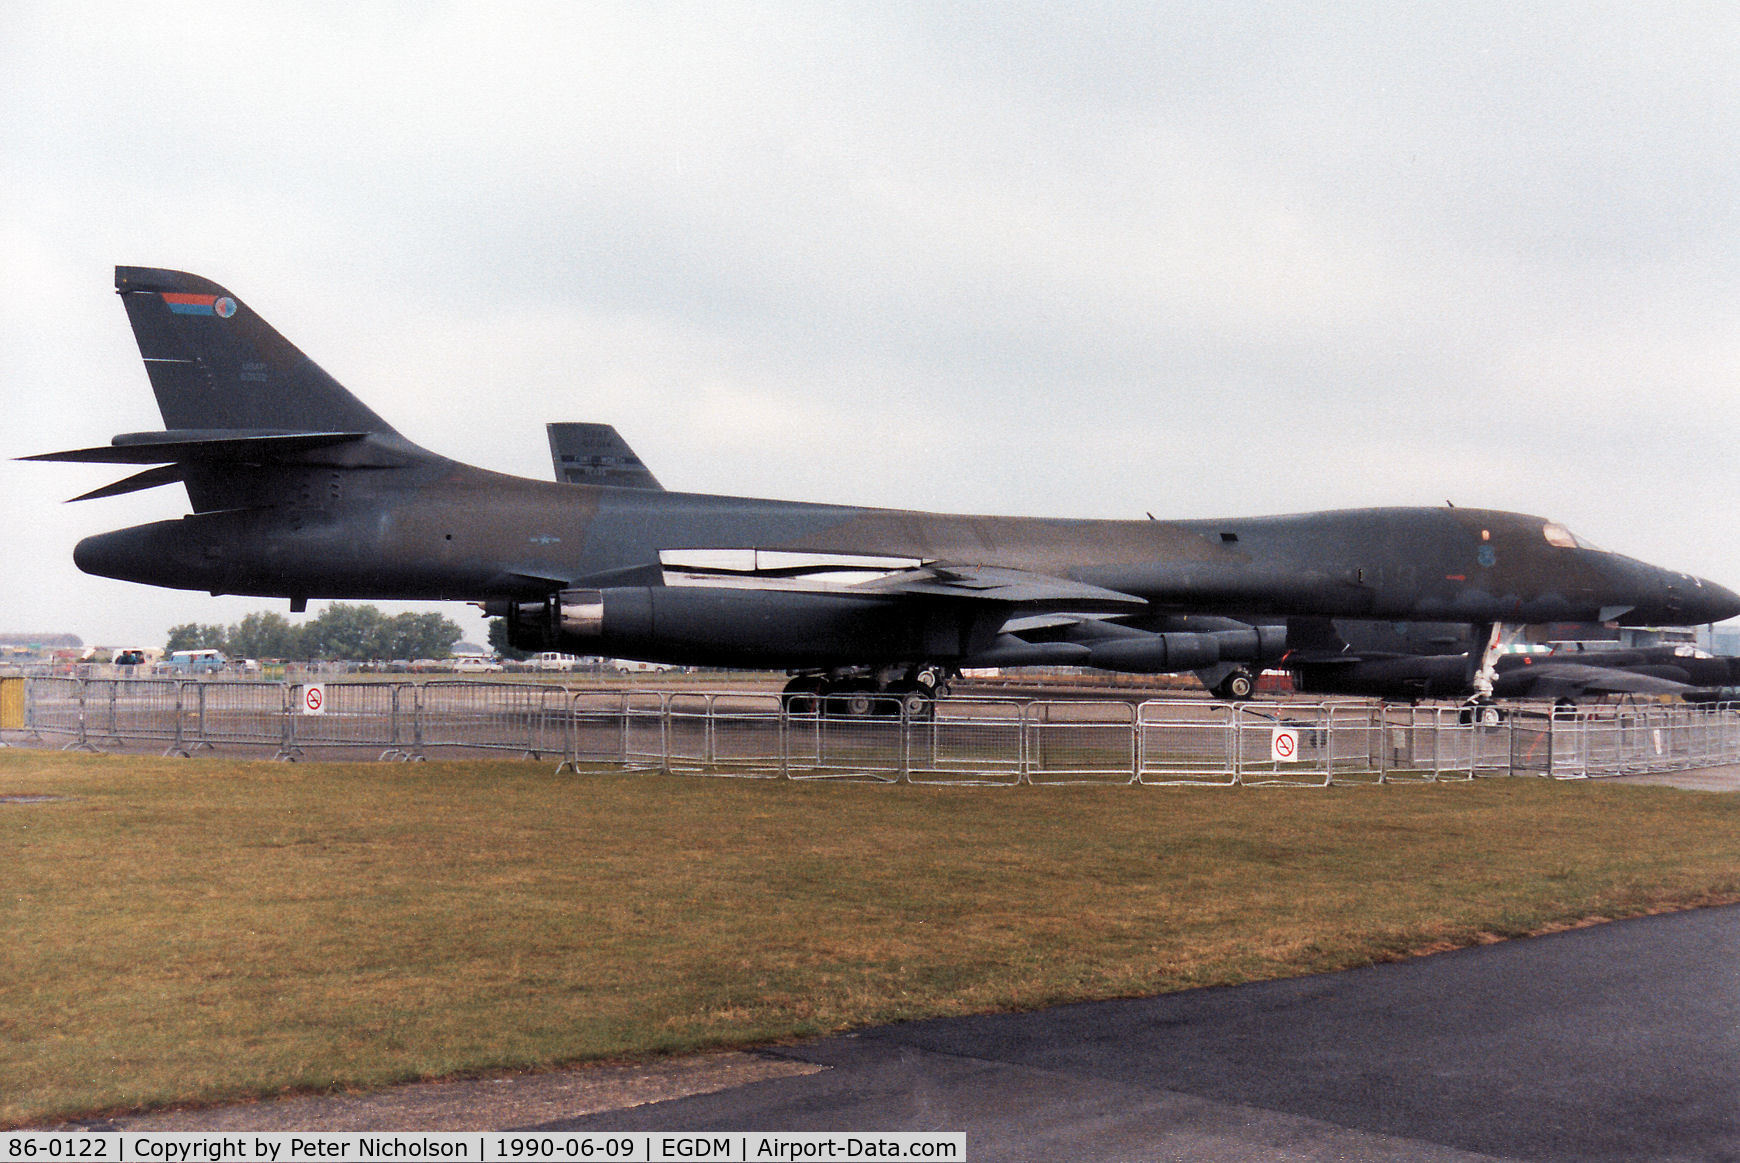 86-0122, 1986 Rockwell B-1B Lancer C/N 82, B-1B Lancer named Excalibur of 46th Bomb Squadron/319th Bomb Wing at Grand Forks AFB on display at the 1990 Boscombe Down Battle of Britain 50th Anniversary Airshow.